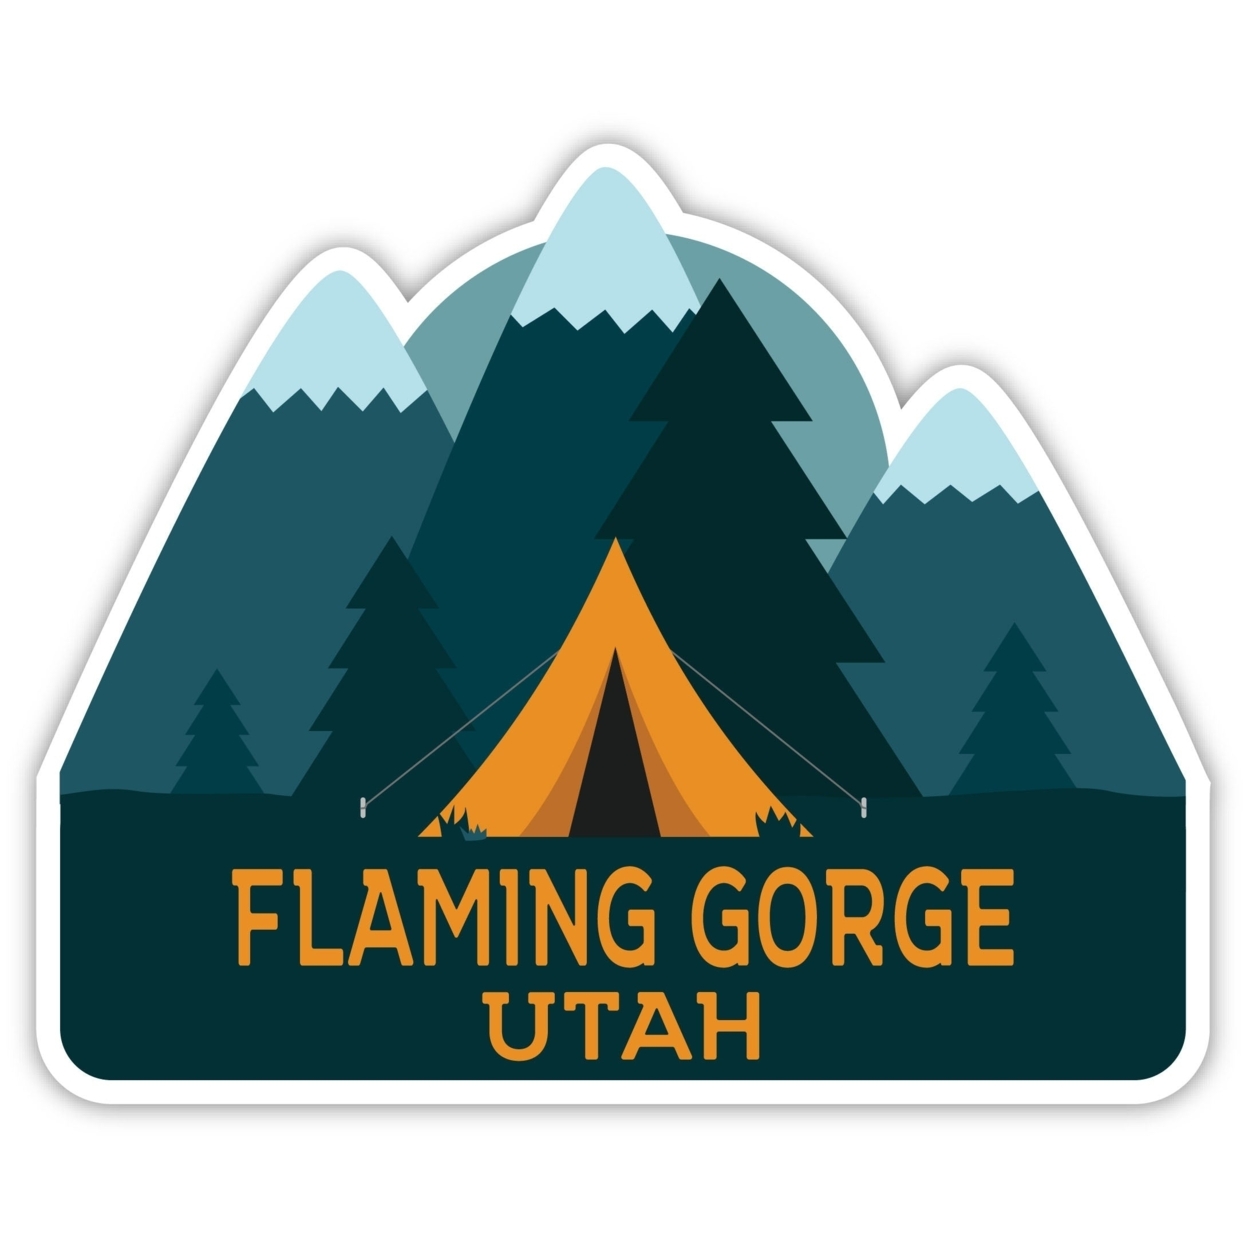 Flaming Gorge Utah Souvenir Decorative Stickers (Choose Theme And Size) - 4-Pack, 10-Inch, Tent